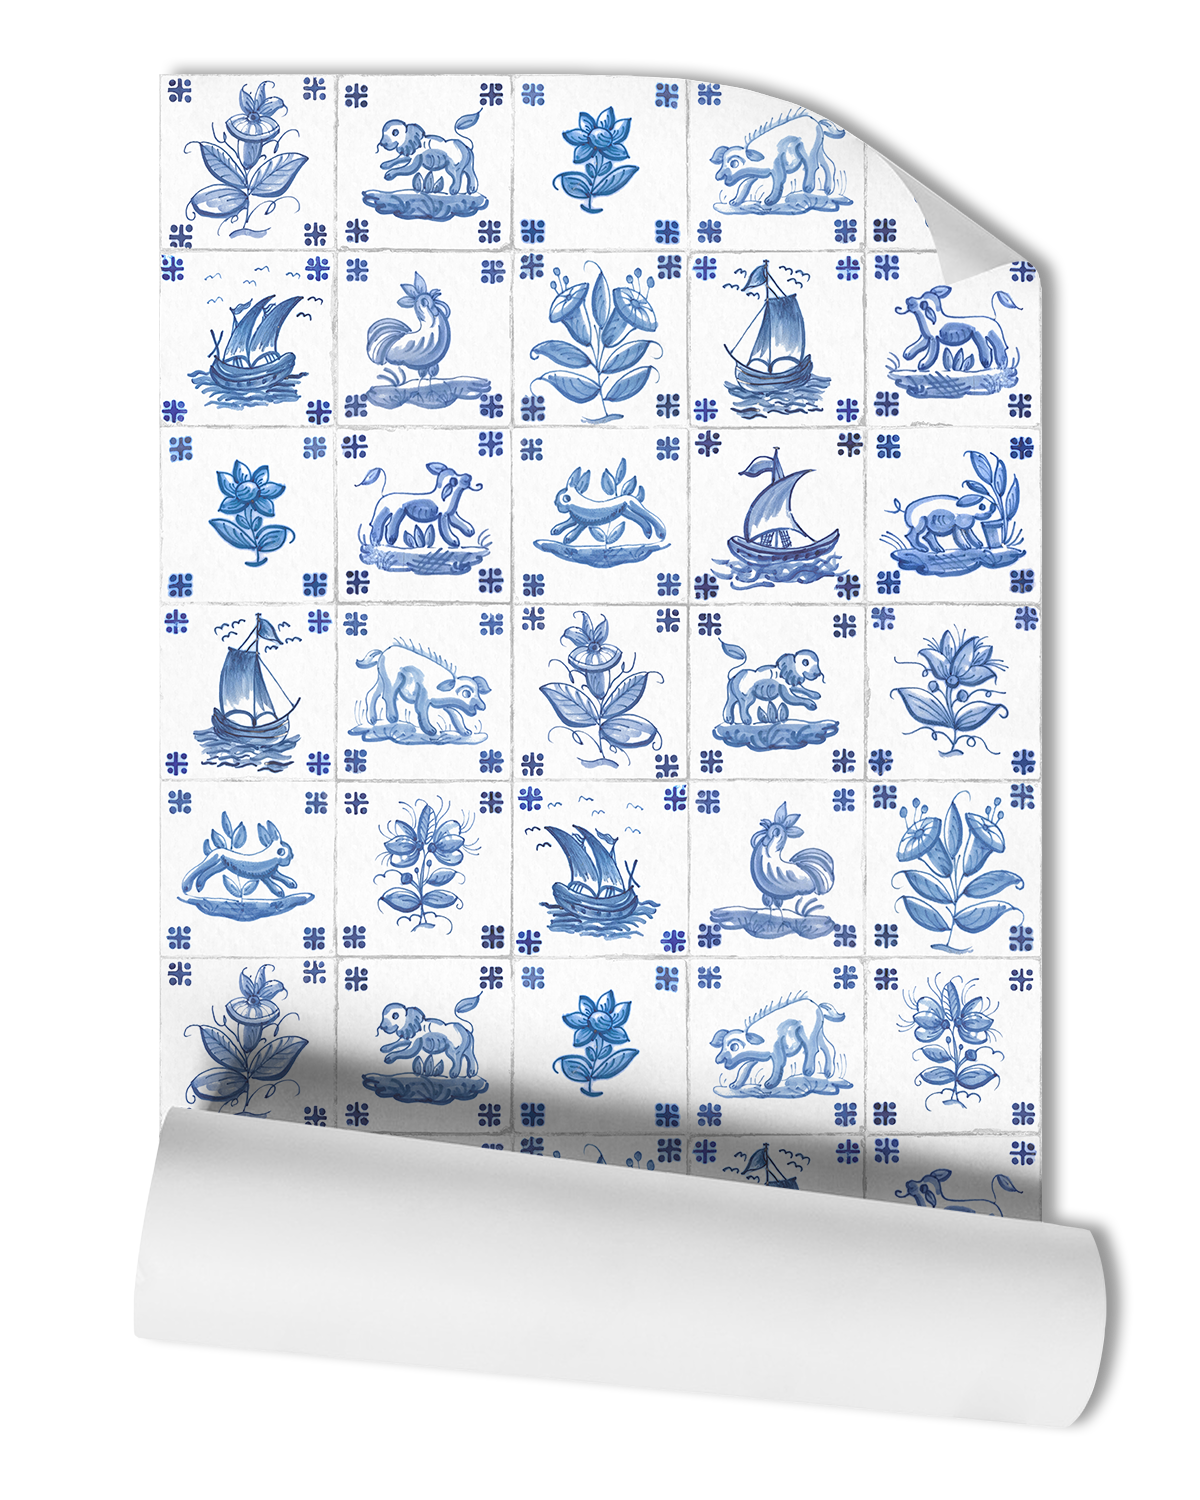 Enhance your space with our Antique Delft Wallpaper in Cornflower, featuring blue-painted delft motifs on white tiles. The tile grout texture and vintage-inspired design create a charming and timeless look.